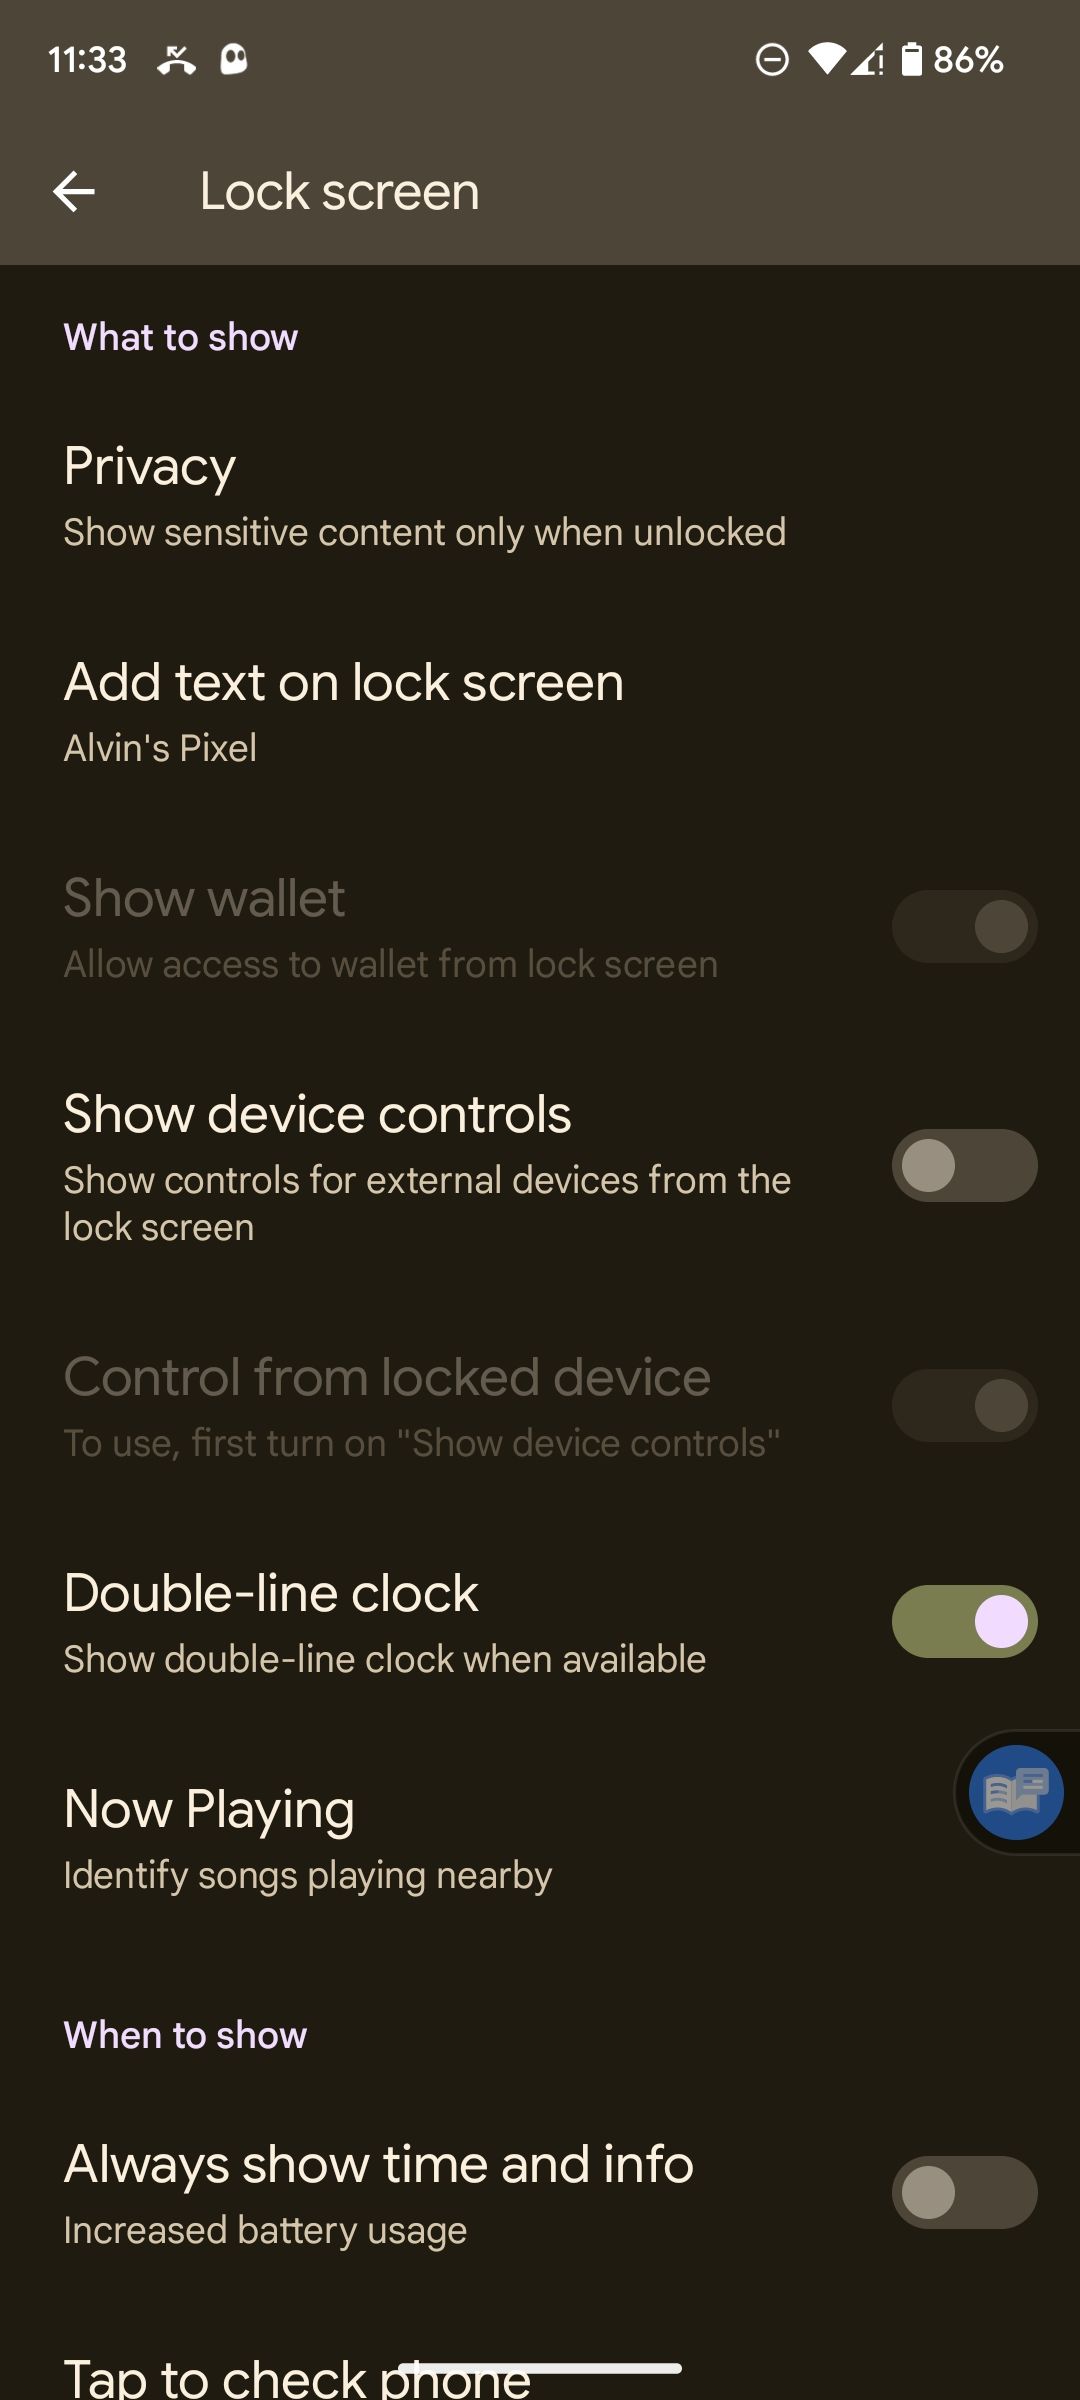 Options to control external devices from locked state in Android 13